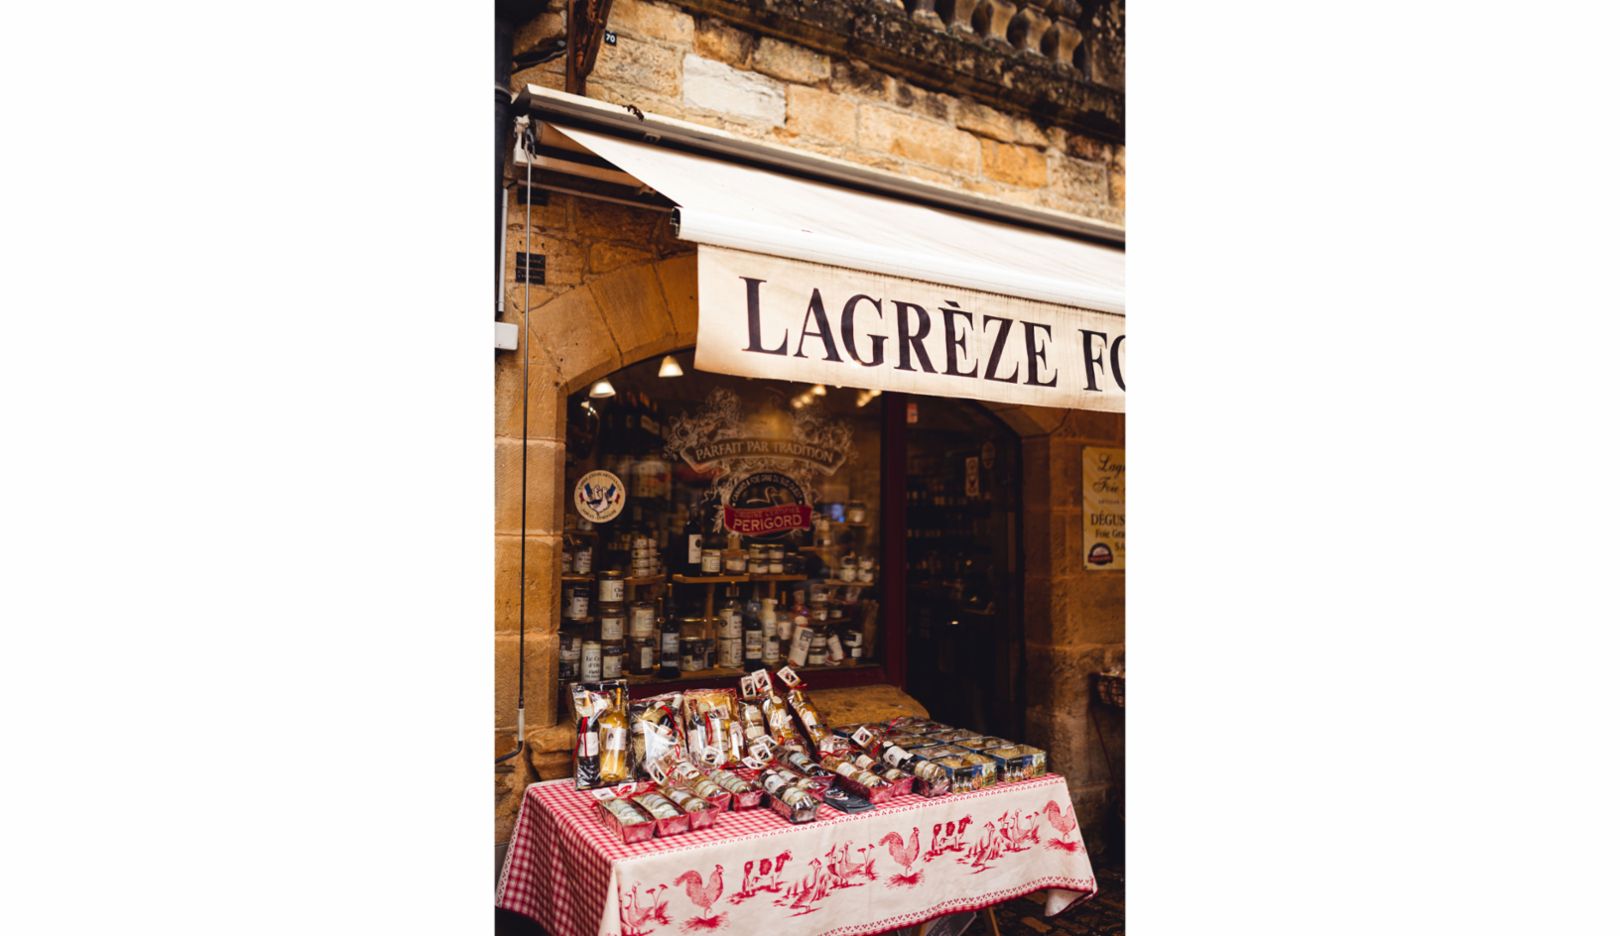 In Sarlat, regional delicacies can be be found not only on the market, but also in the many small shops exuding French flair.